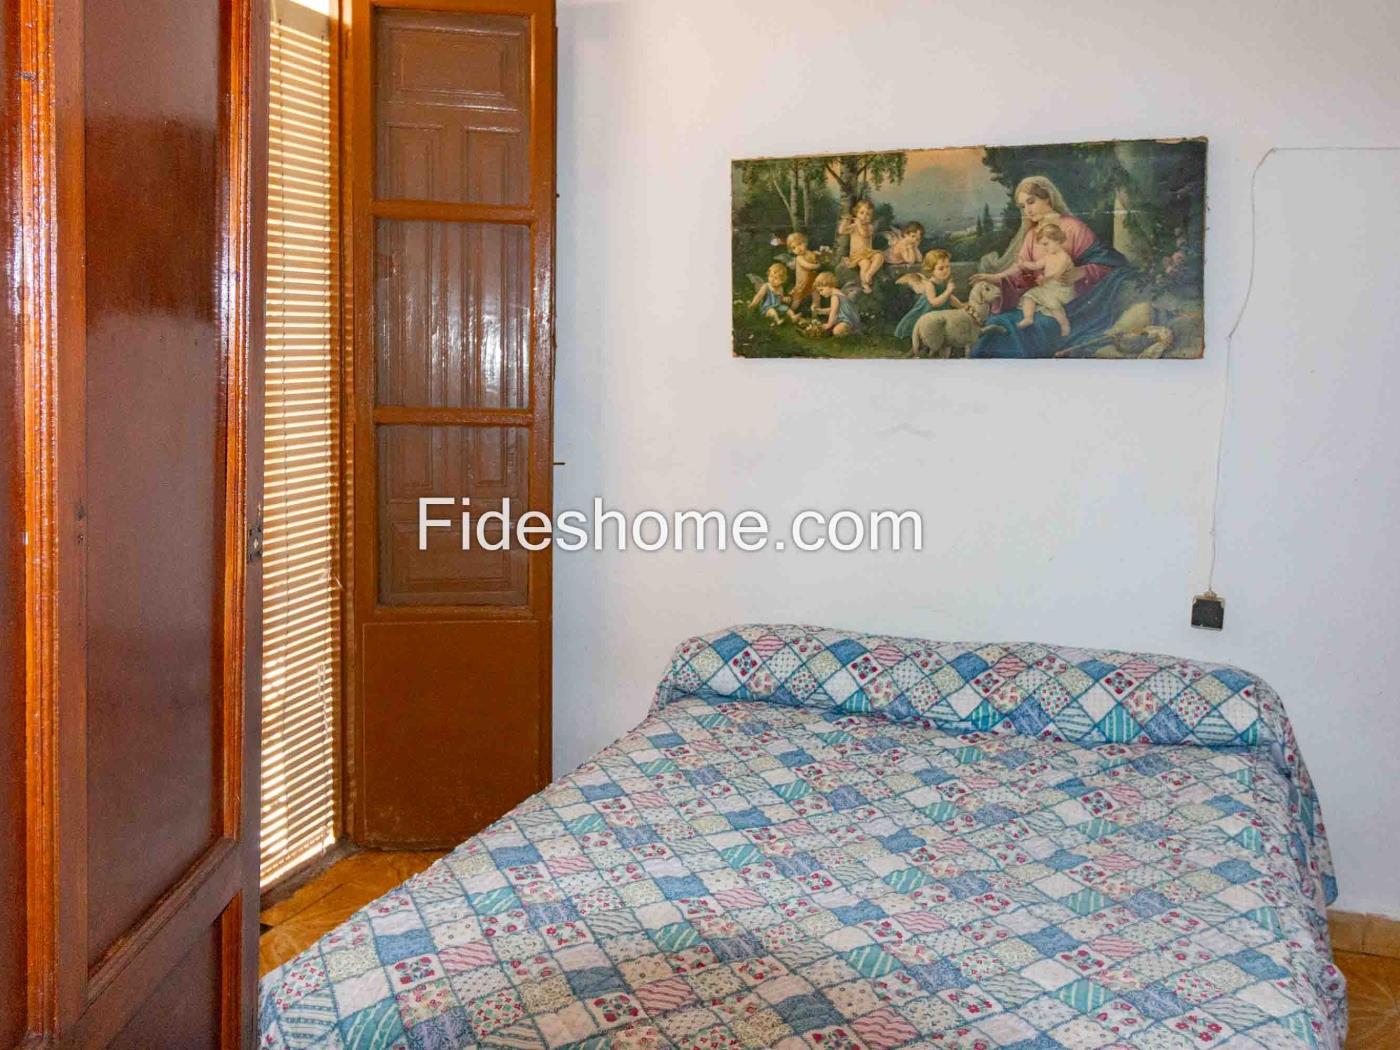 Centrally located townhouse with a spacious garden in Dúrcal in Dúrcal